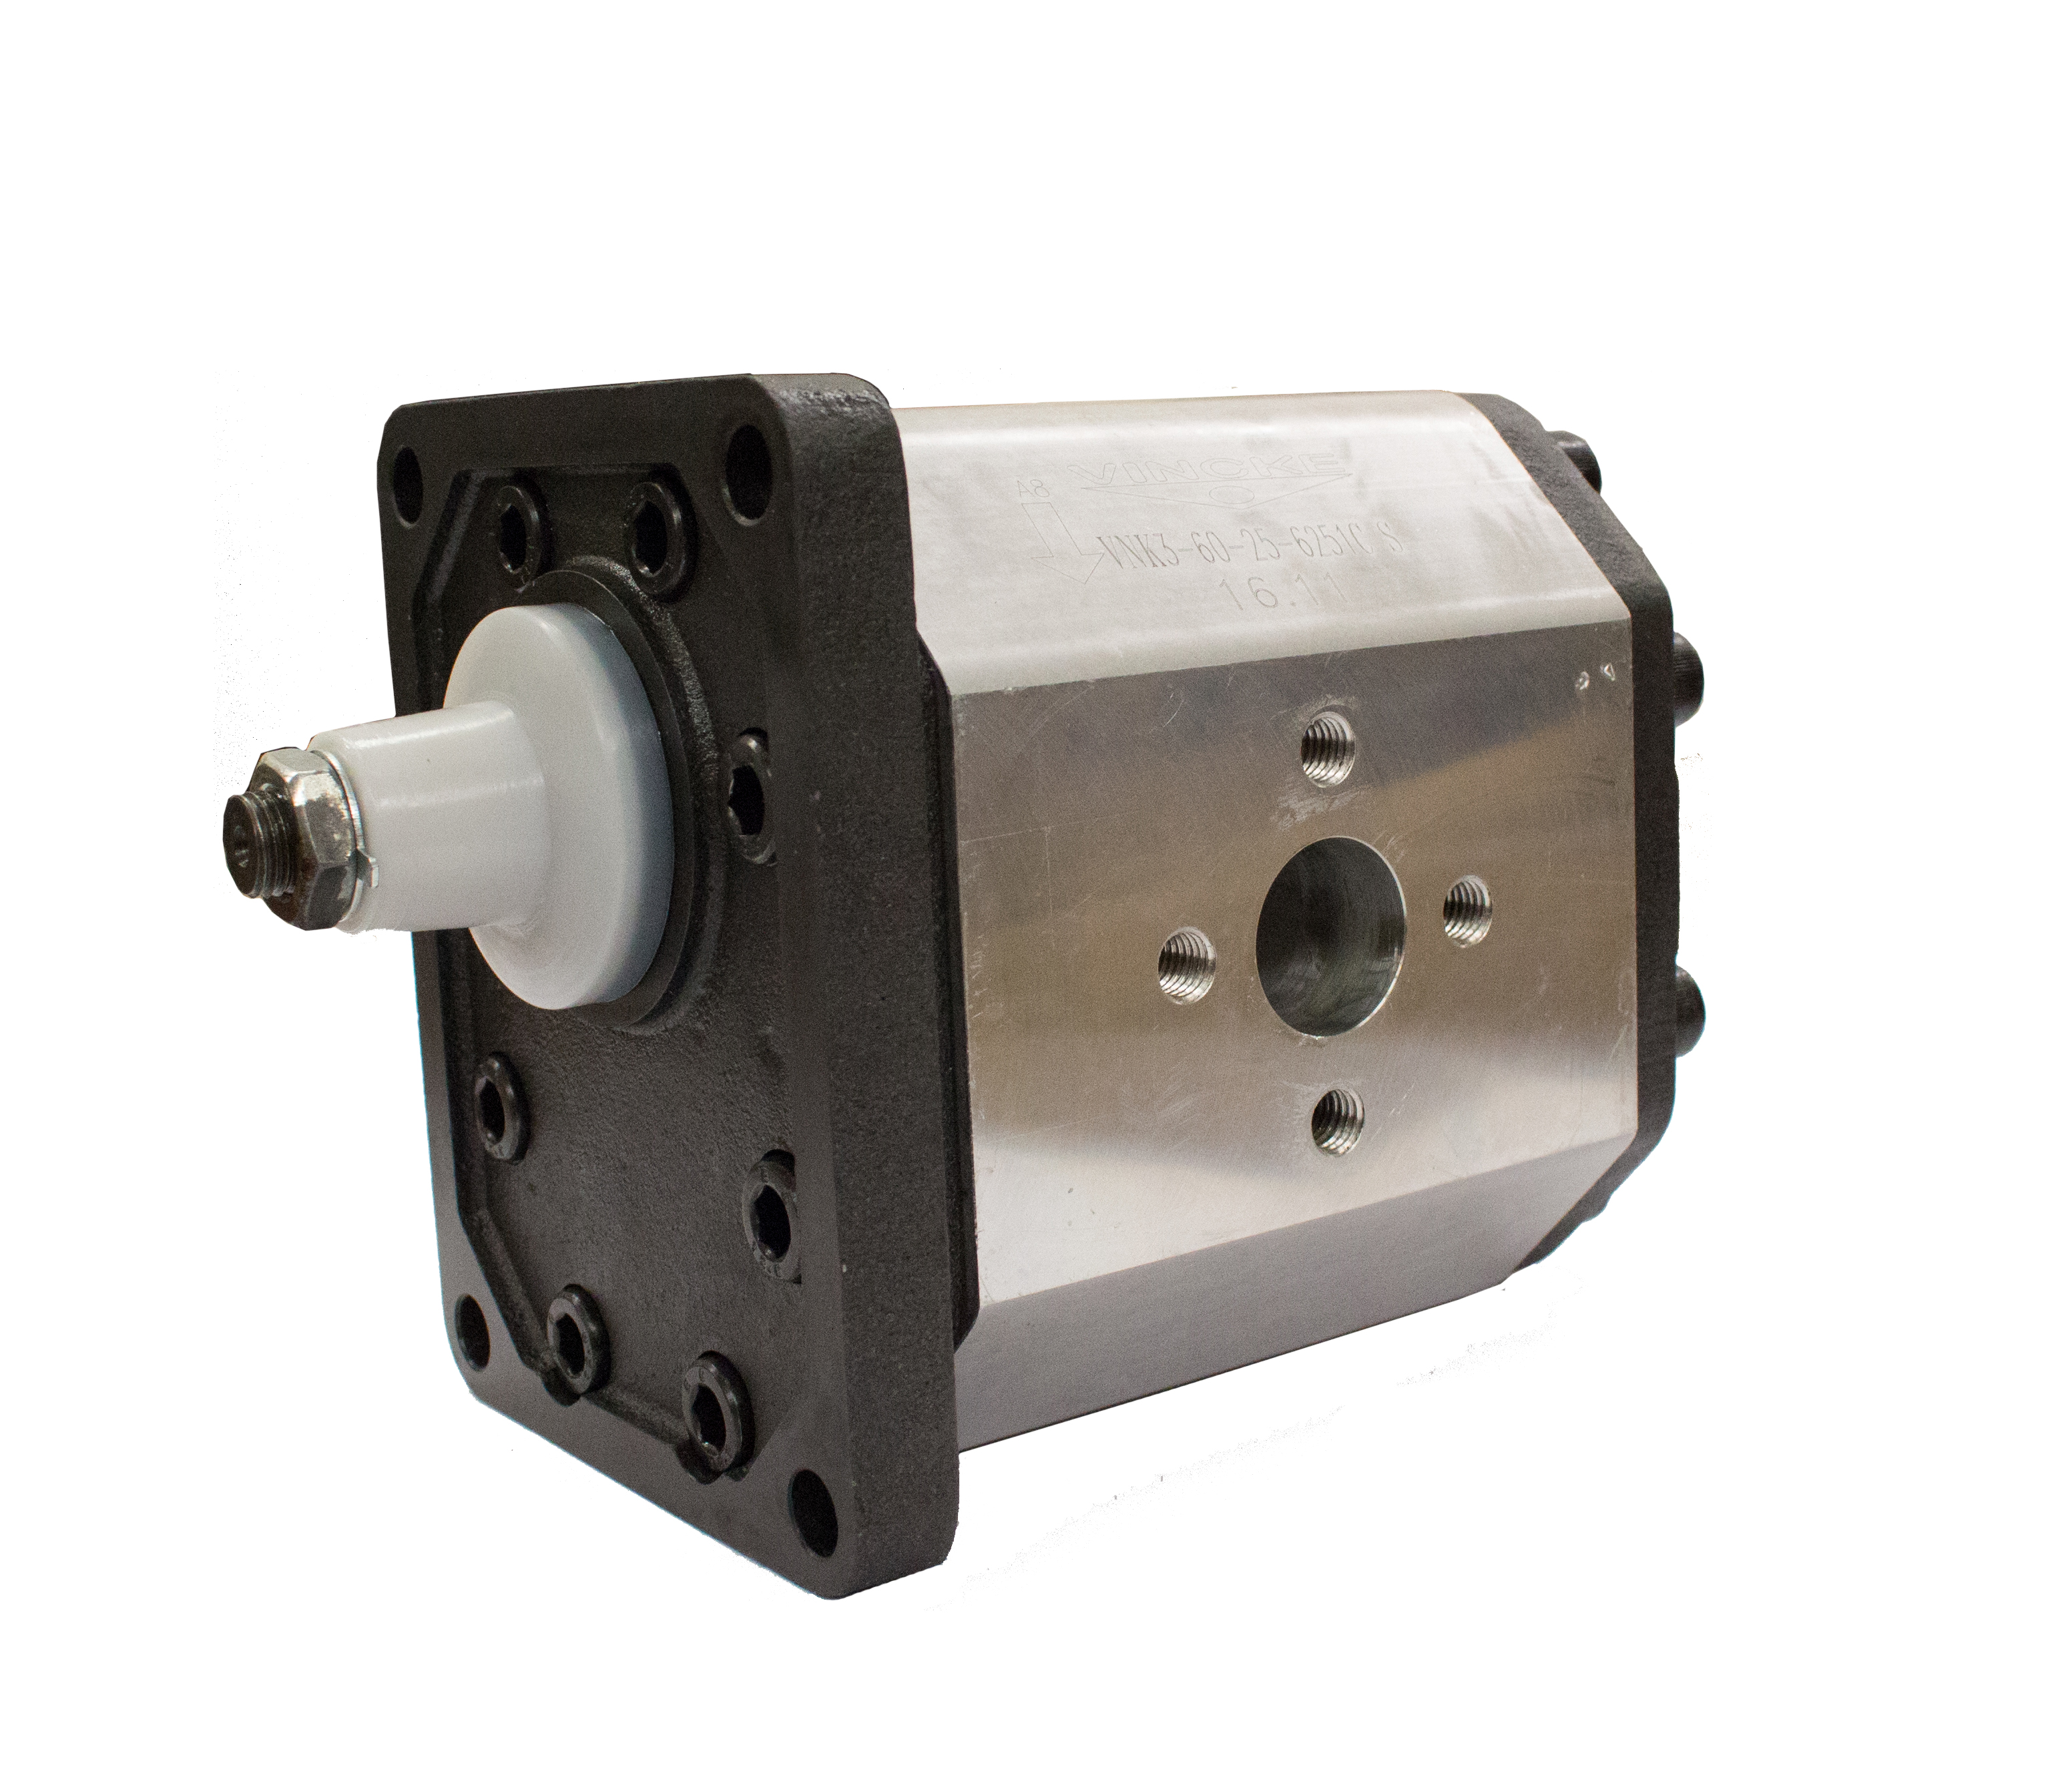 Flowfit Hydraulic Gear Pump, Group 3, Clockwise 25CC, 51mm Inlet x 40mm Outlet Flanged Ports, 4 Bolt EU Flange